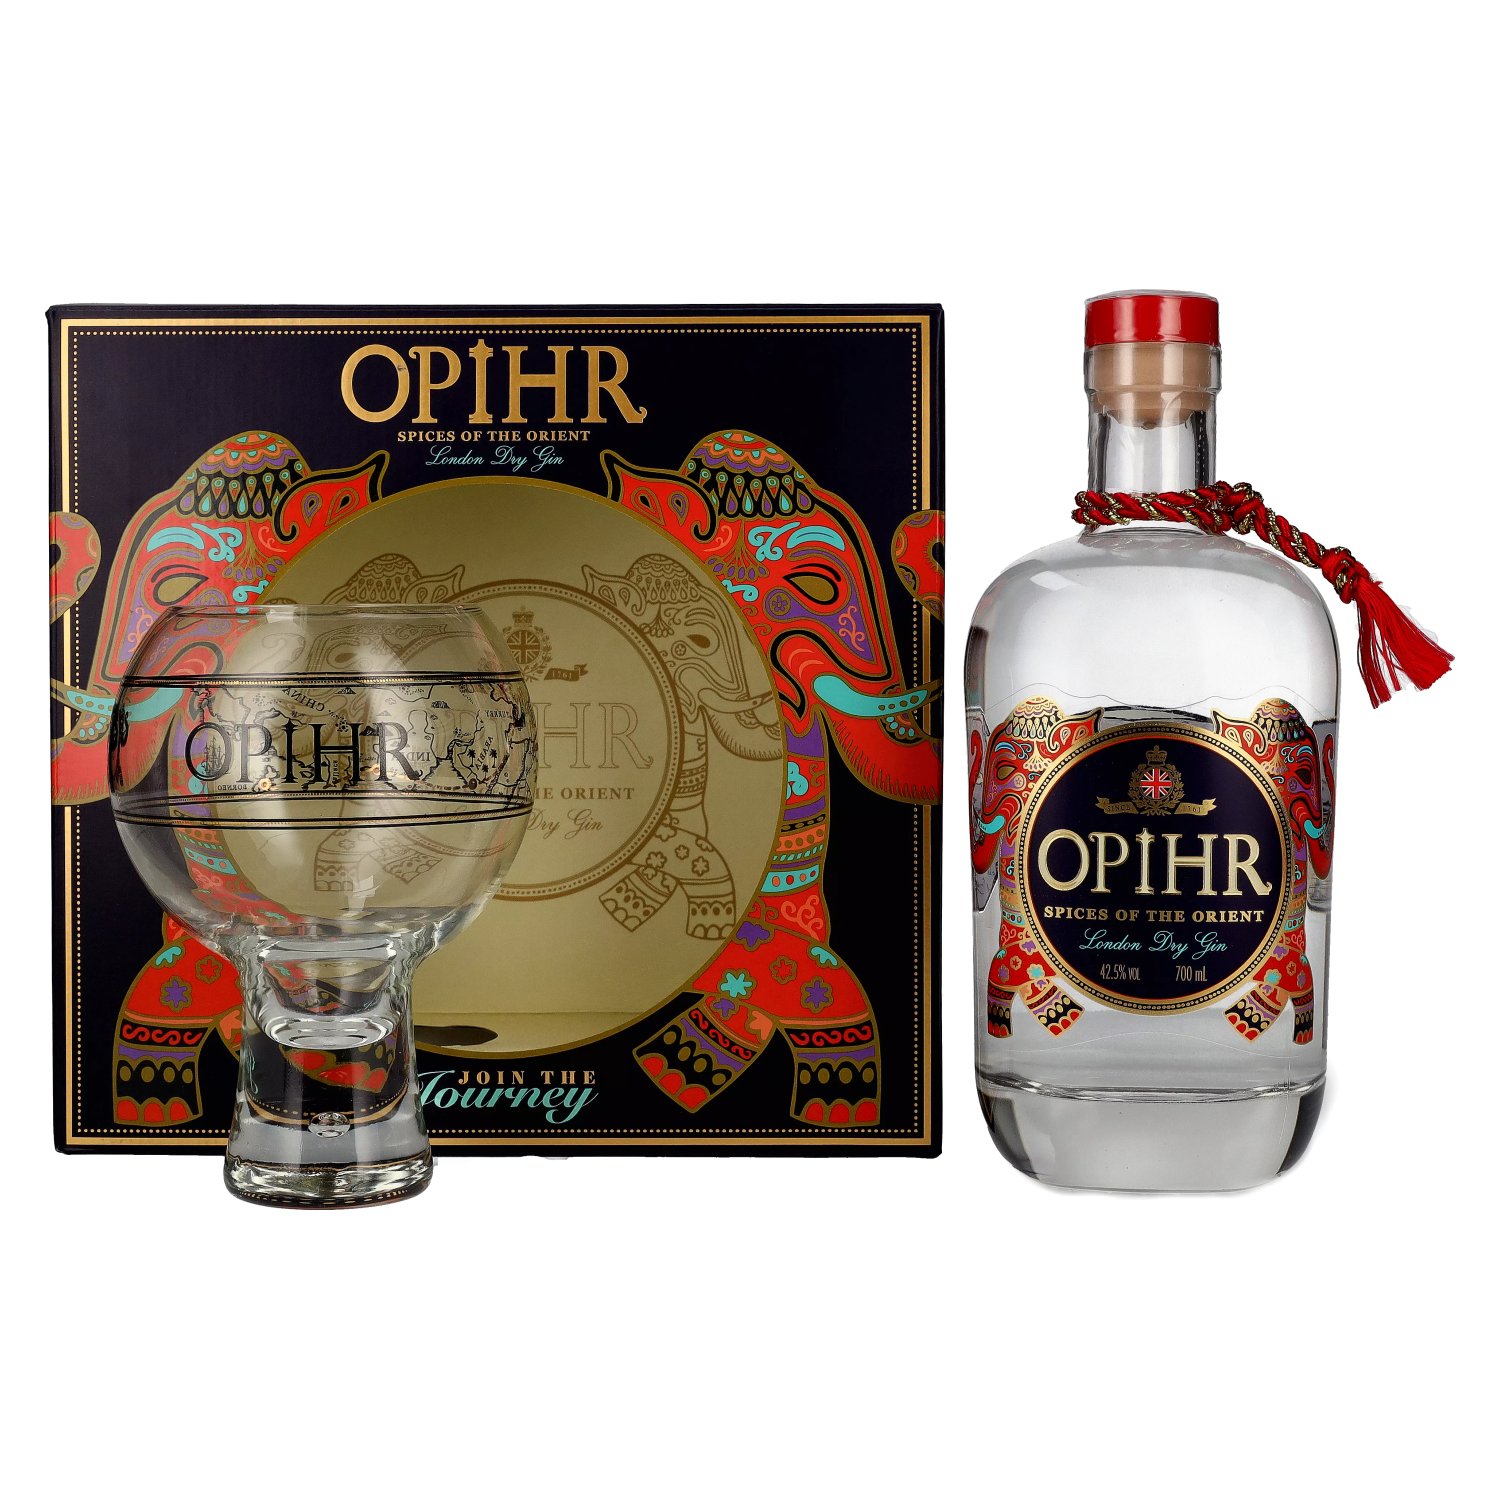 Opihr ORIENTAL SPICED London Dry Gin 42,5% Vol. 0,7l in Giftbox with  Globe-glass | Gin